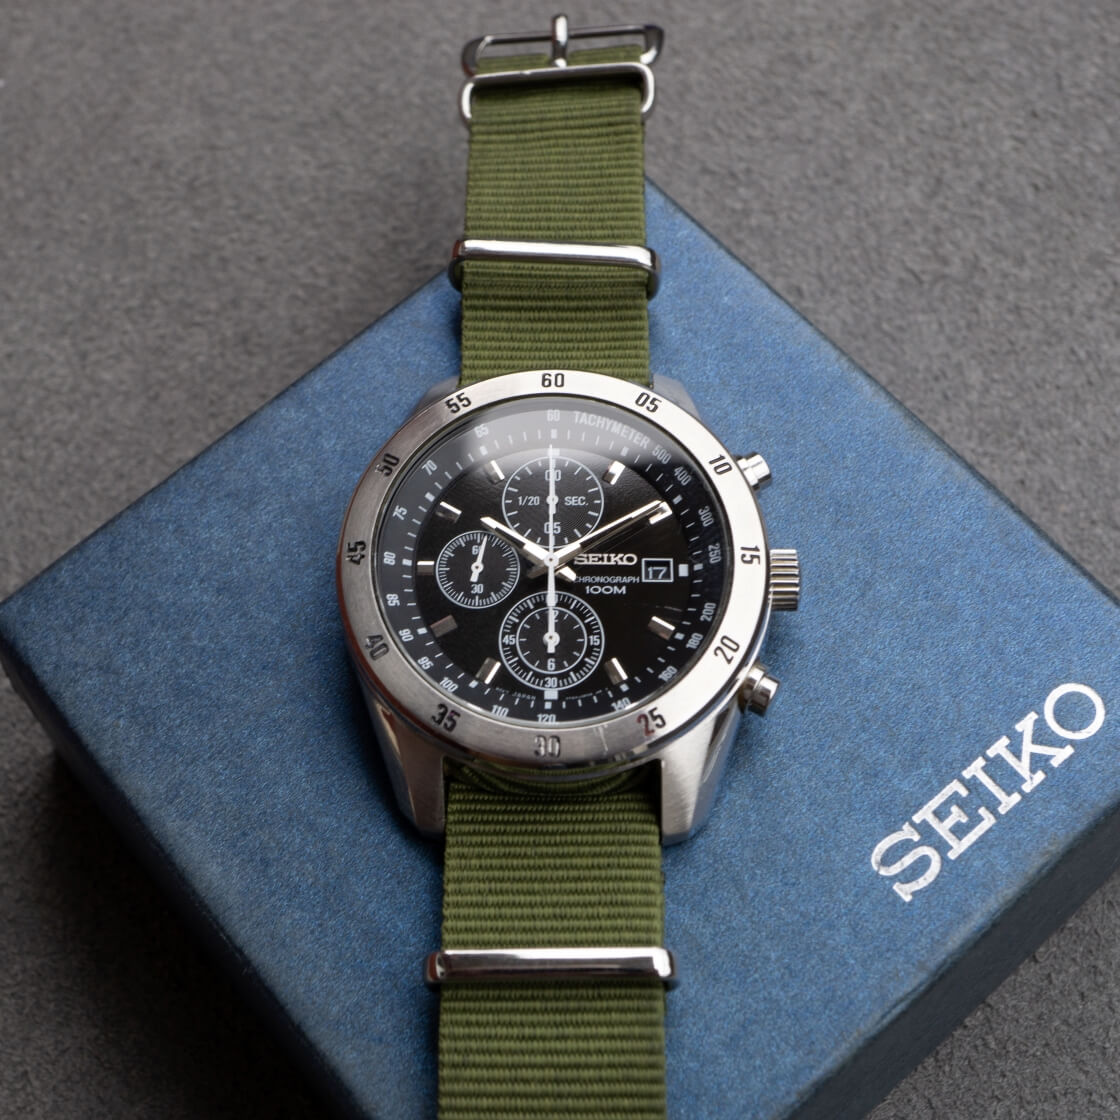 green crown and buckle standard nato strap